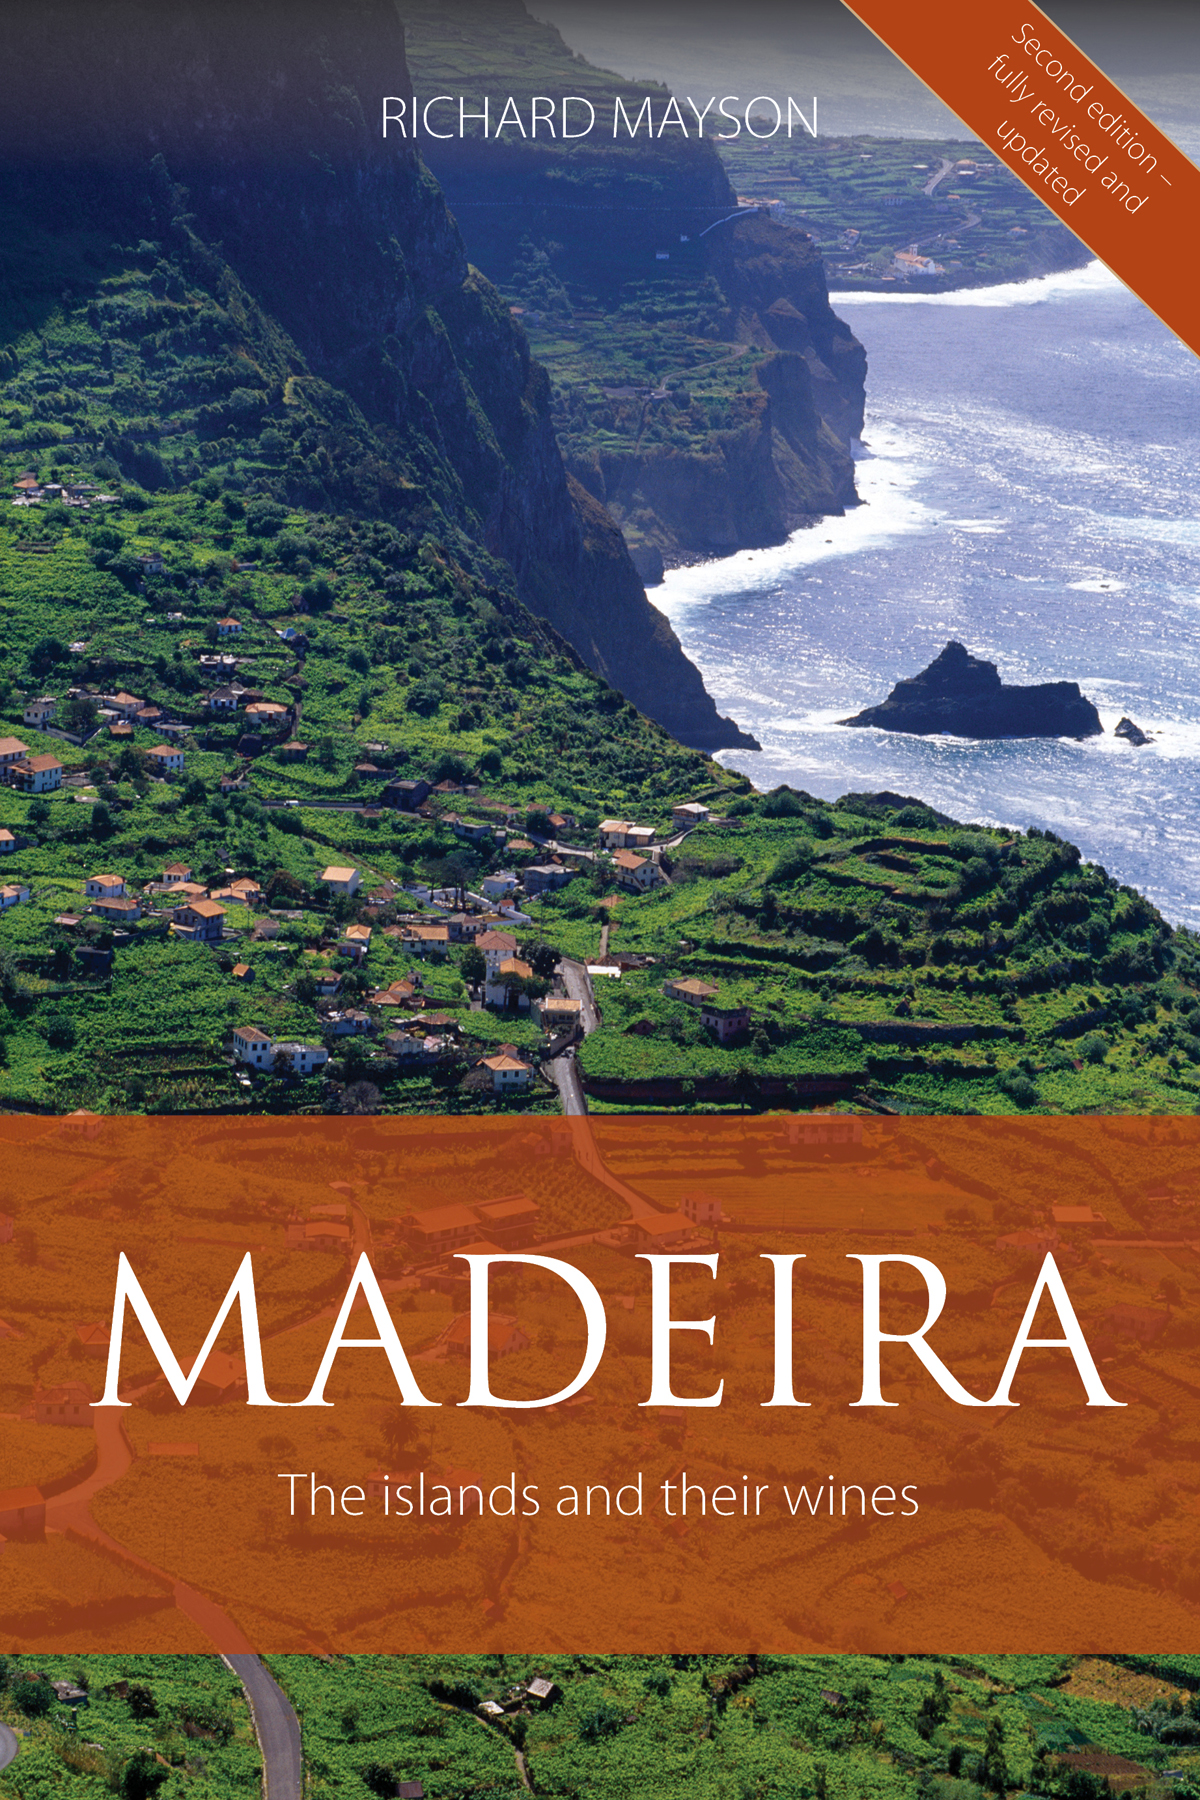 Extract: Madeira (2nd edition) by Richard Mayson